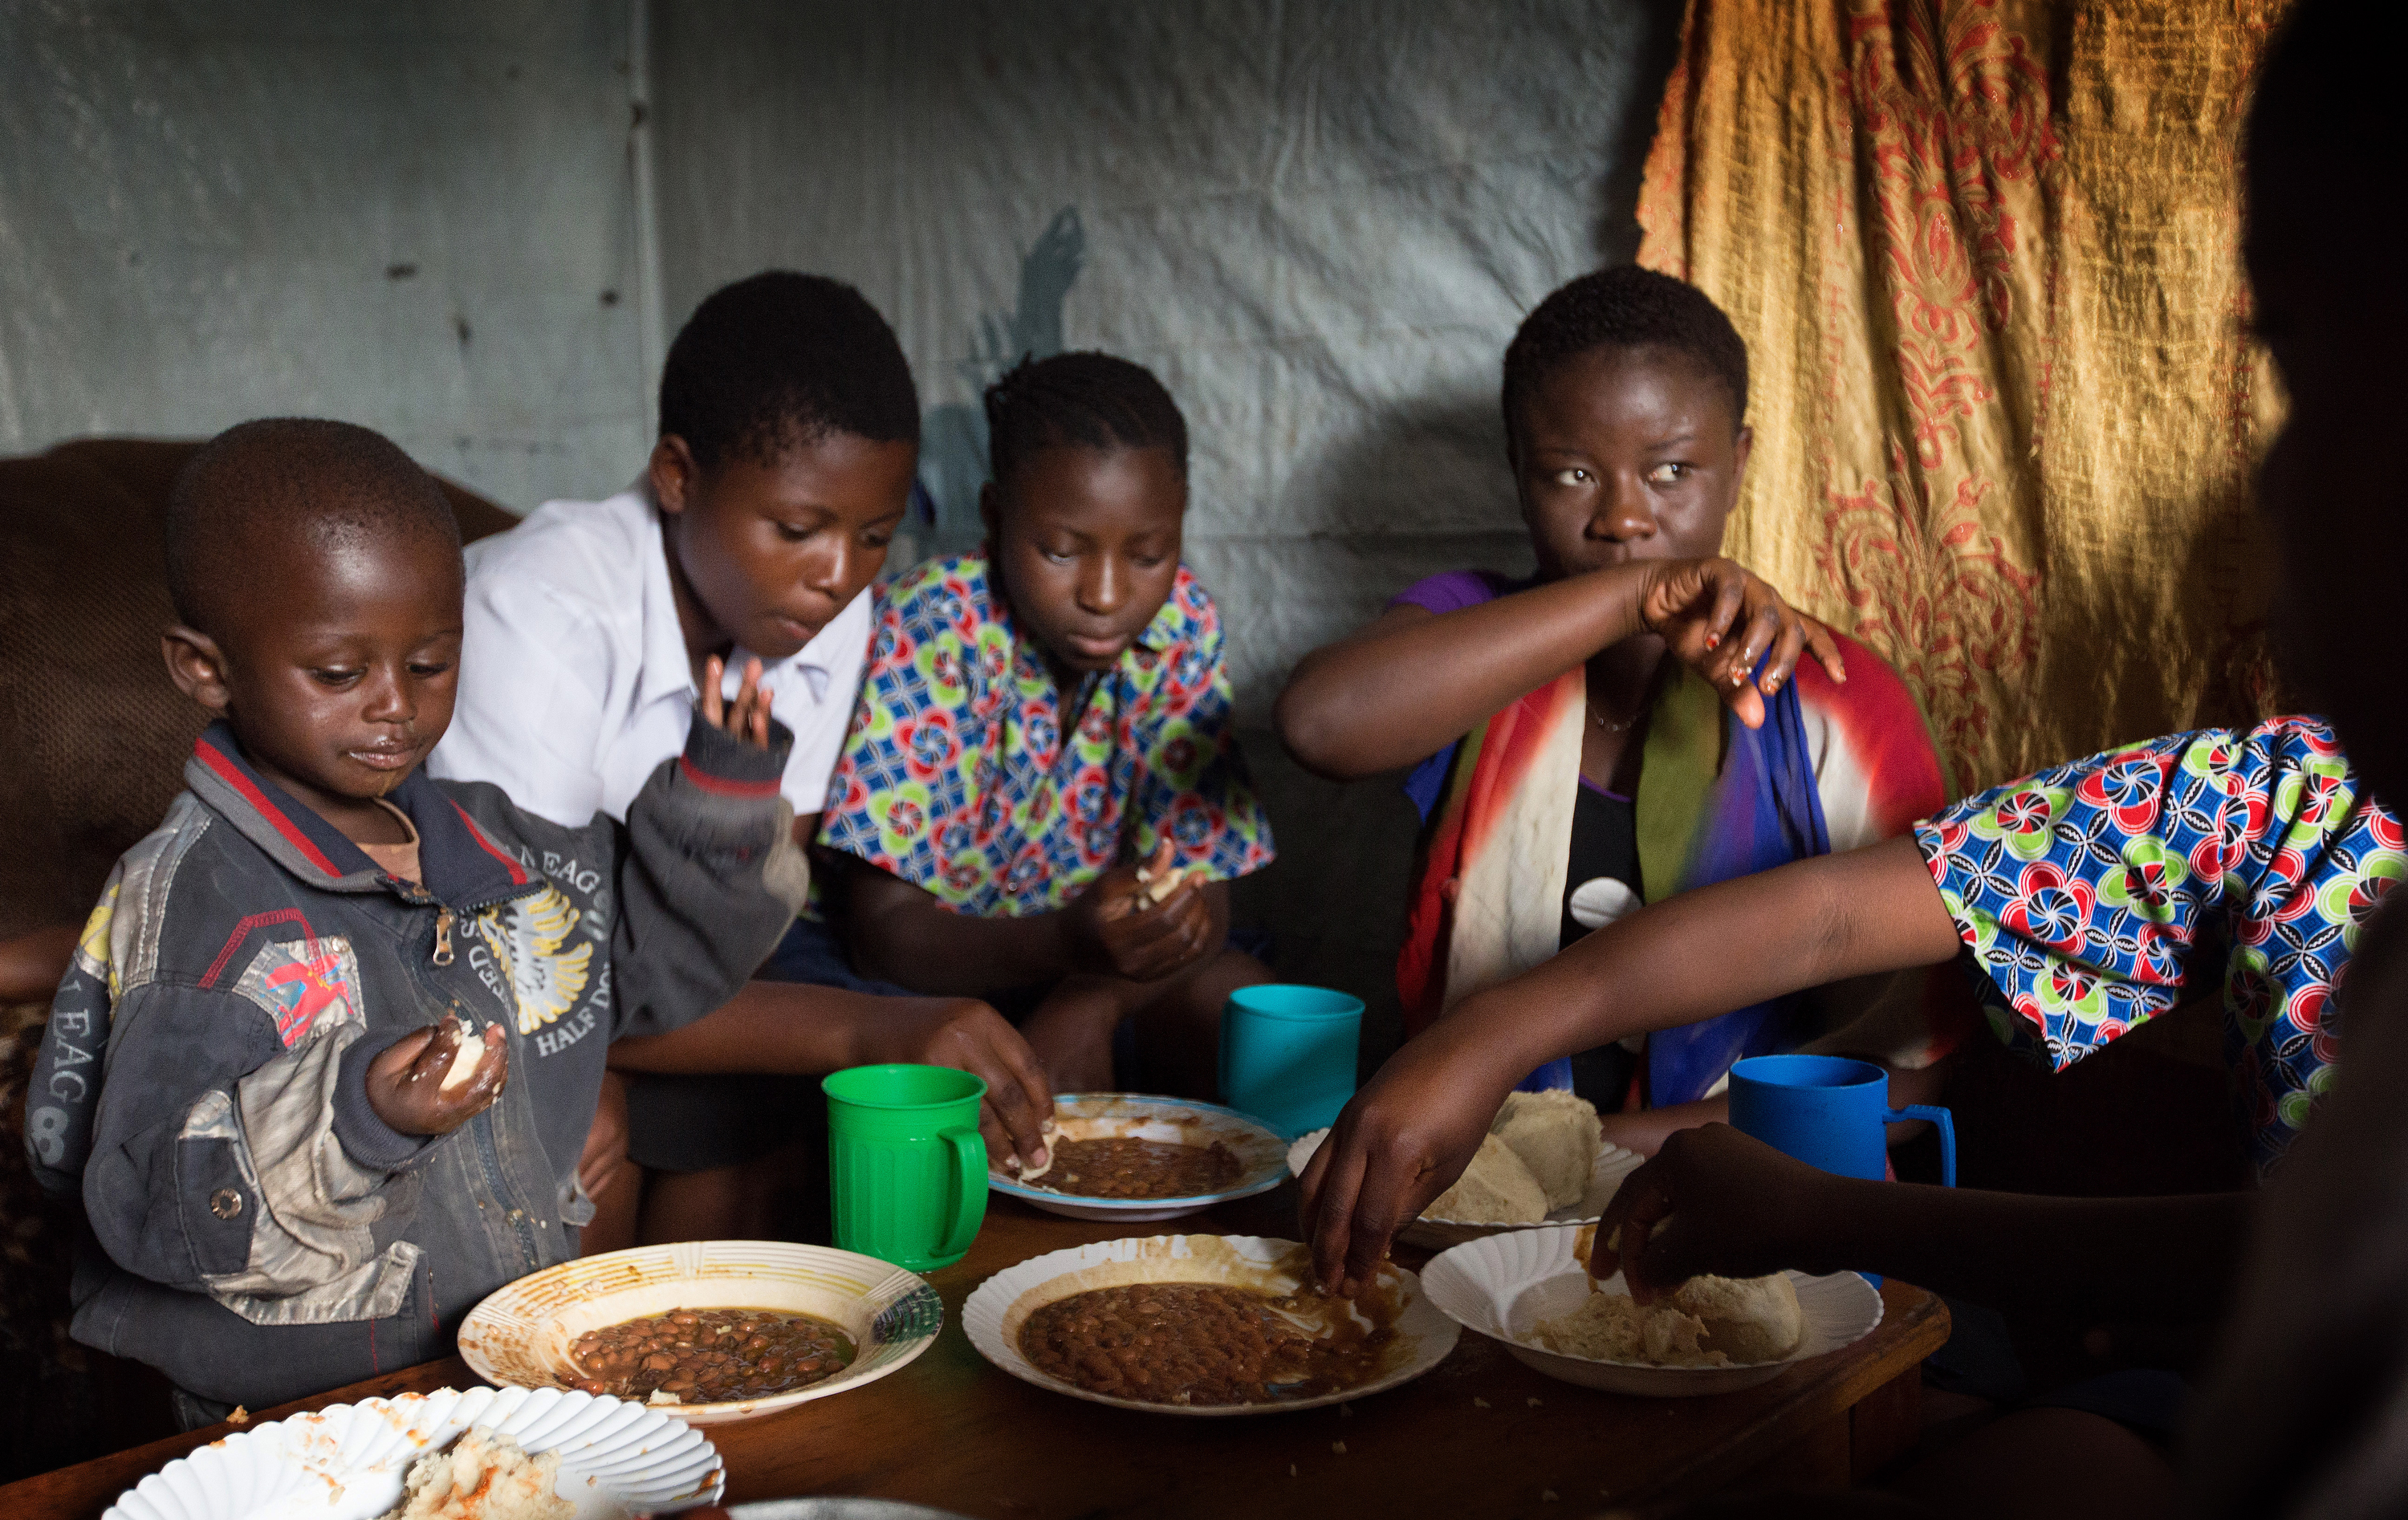 Children share their one daily meal at the United Methodist orphanage in Goma, Congo, in 2015. United Methodists joined other faith groups at the United Nations during a symposium to explore how best to support the U.N.’s Sustainable Development Goals for improving human lives. File photo by Mike DuBose, UMNS.